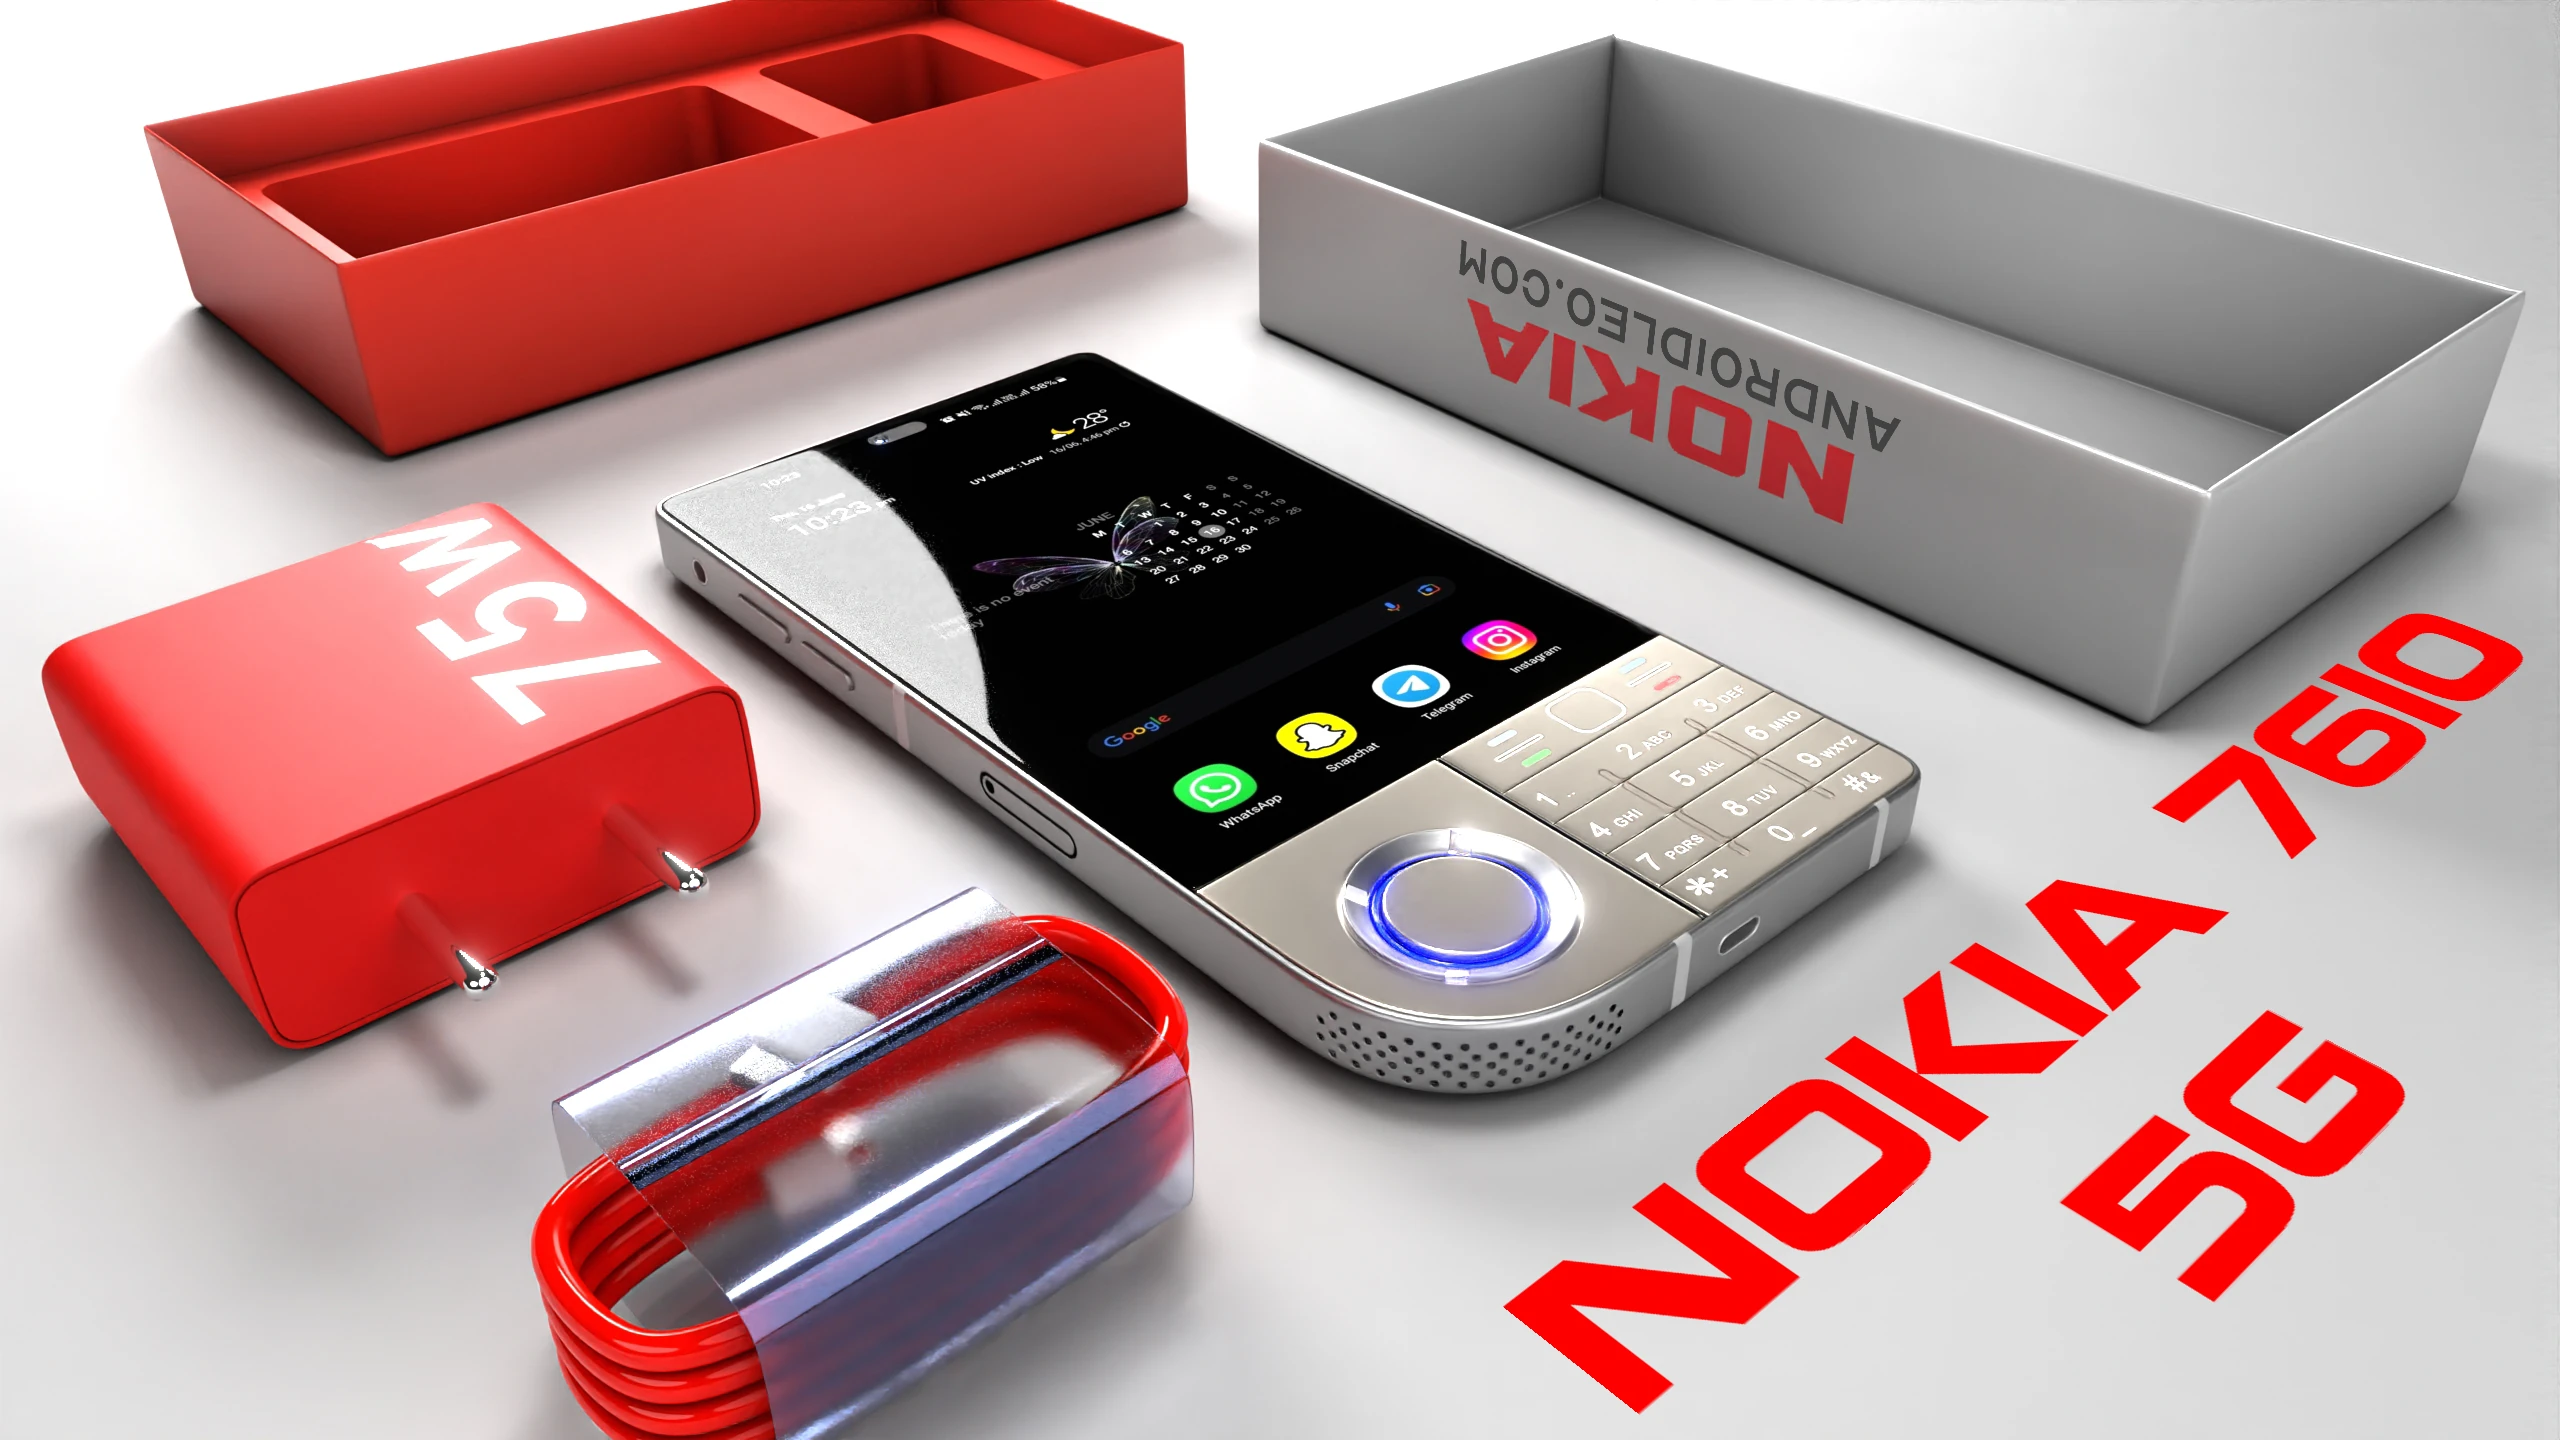 Nokia 7610 5G - specifications, Unboxing, Release Date, Price